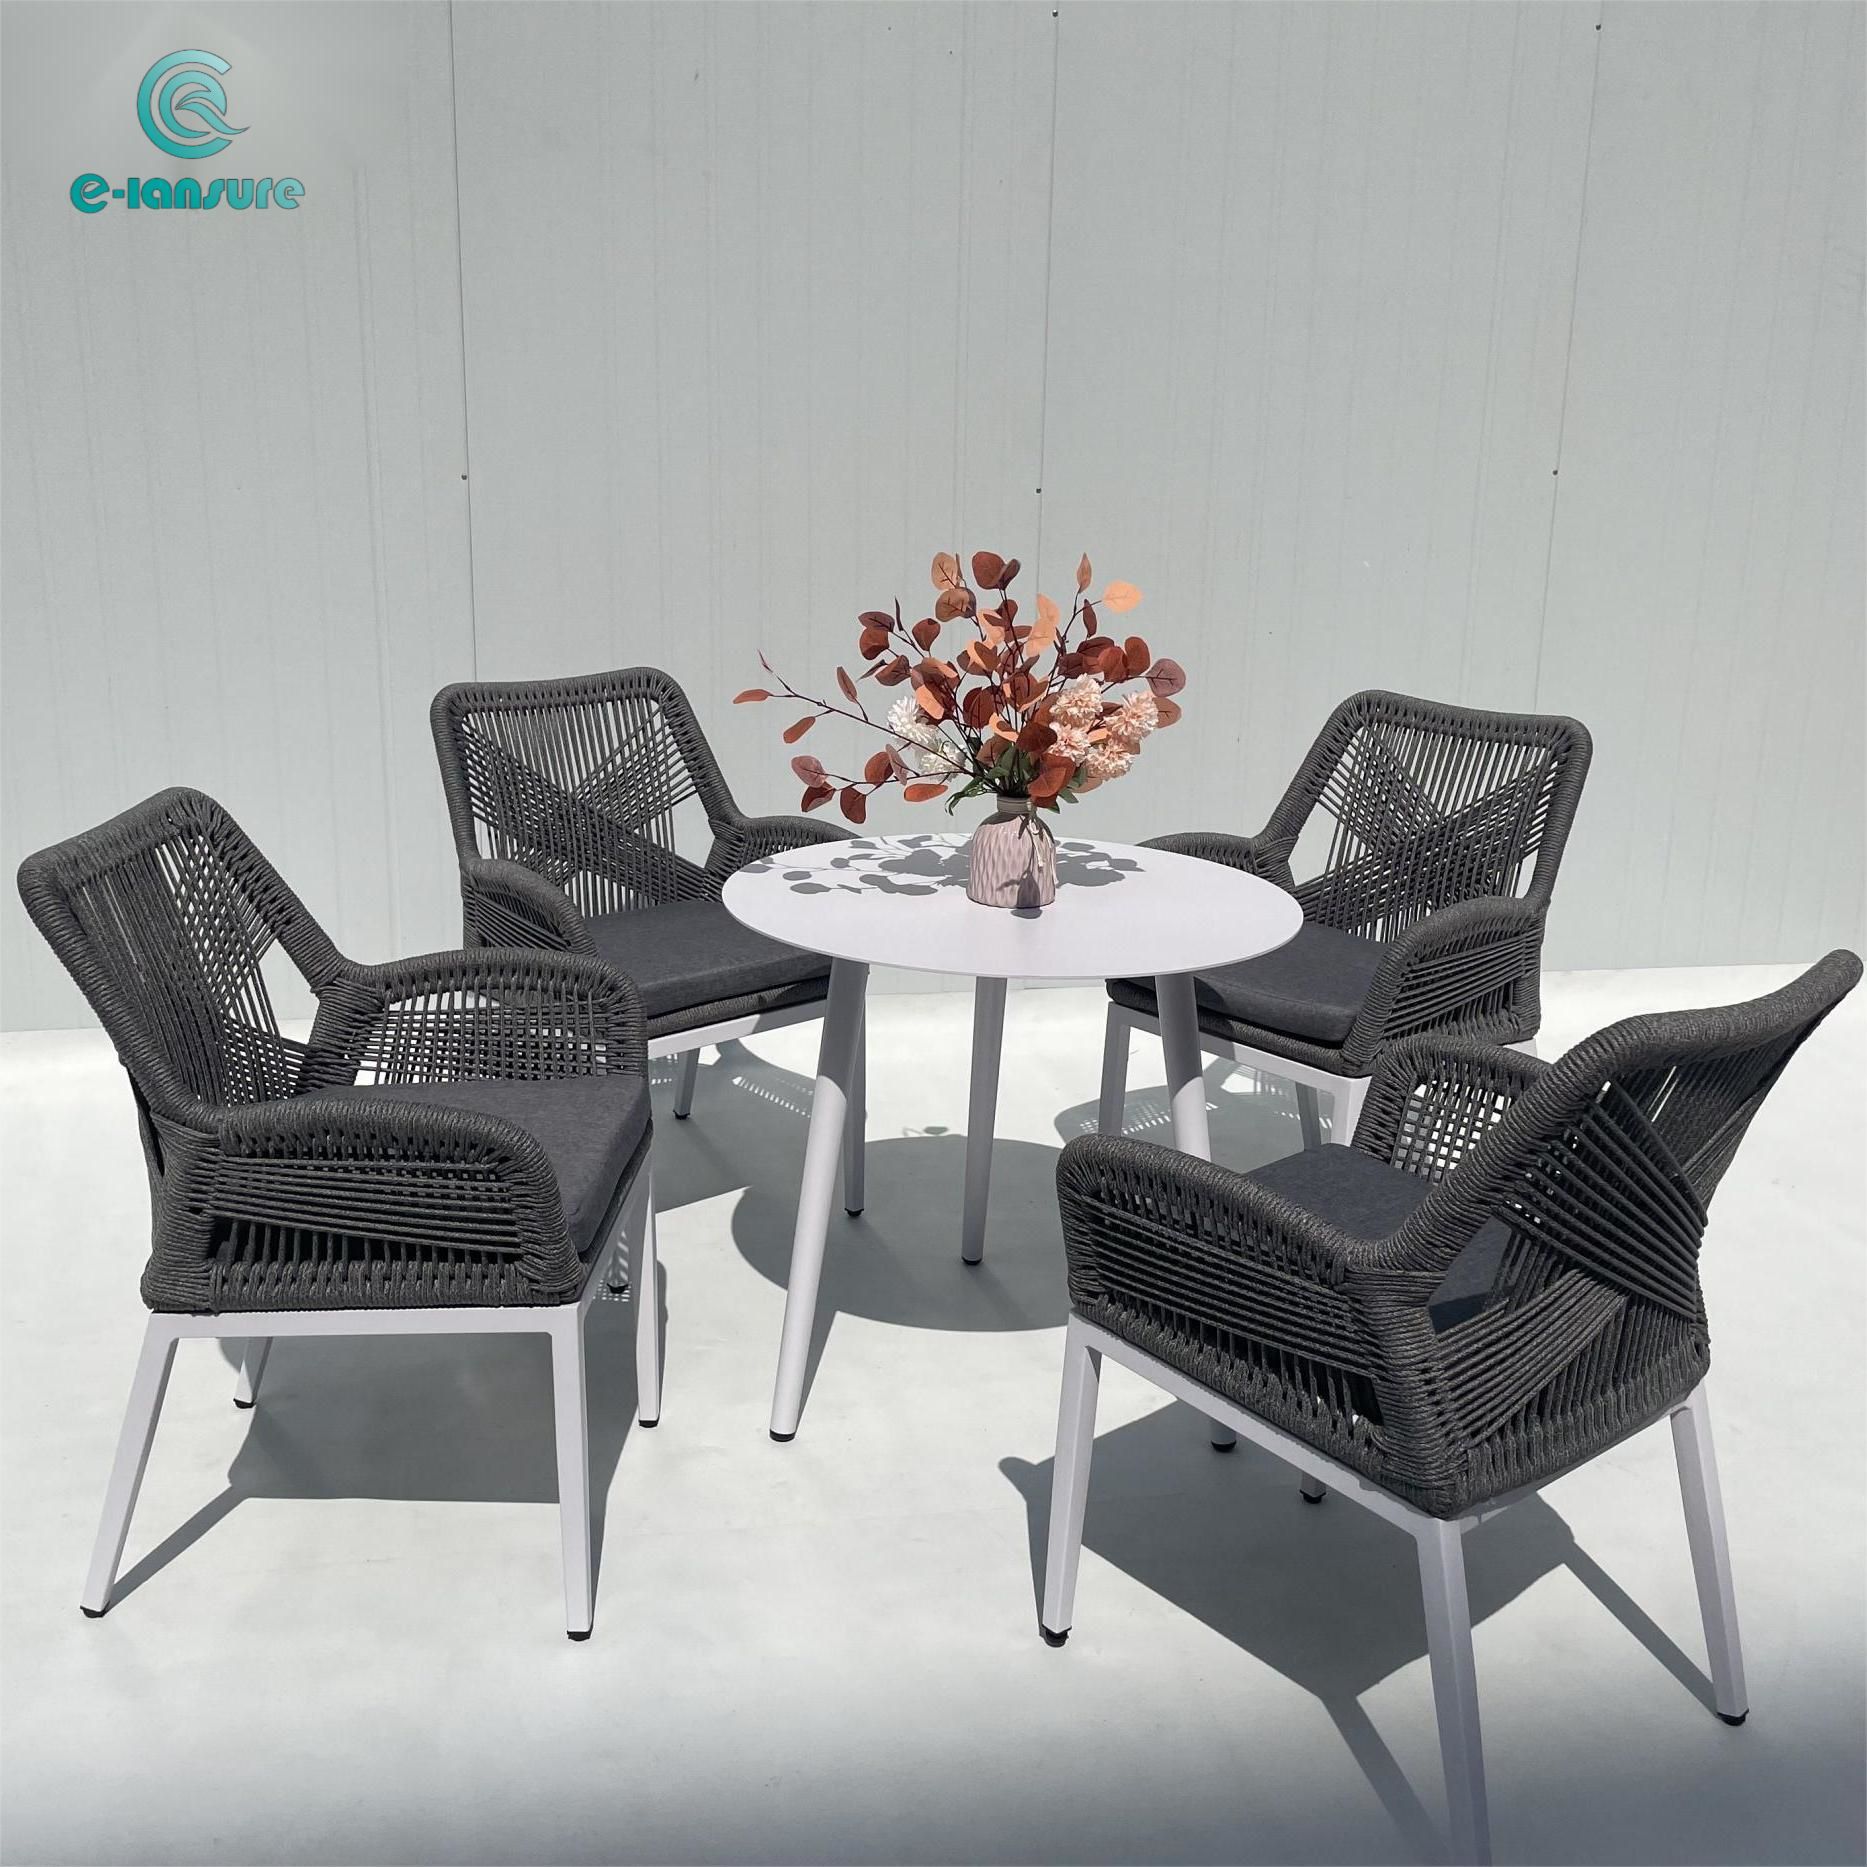 Custom outdoor furniture coffee table set with black rope chair